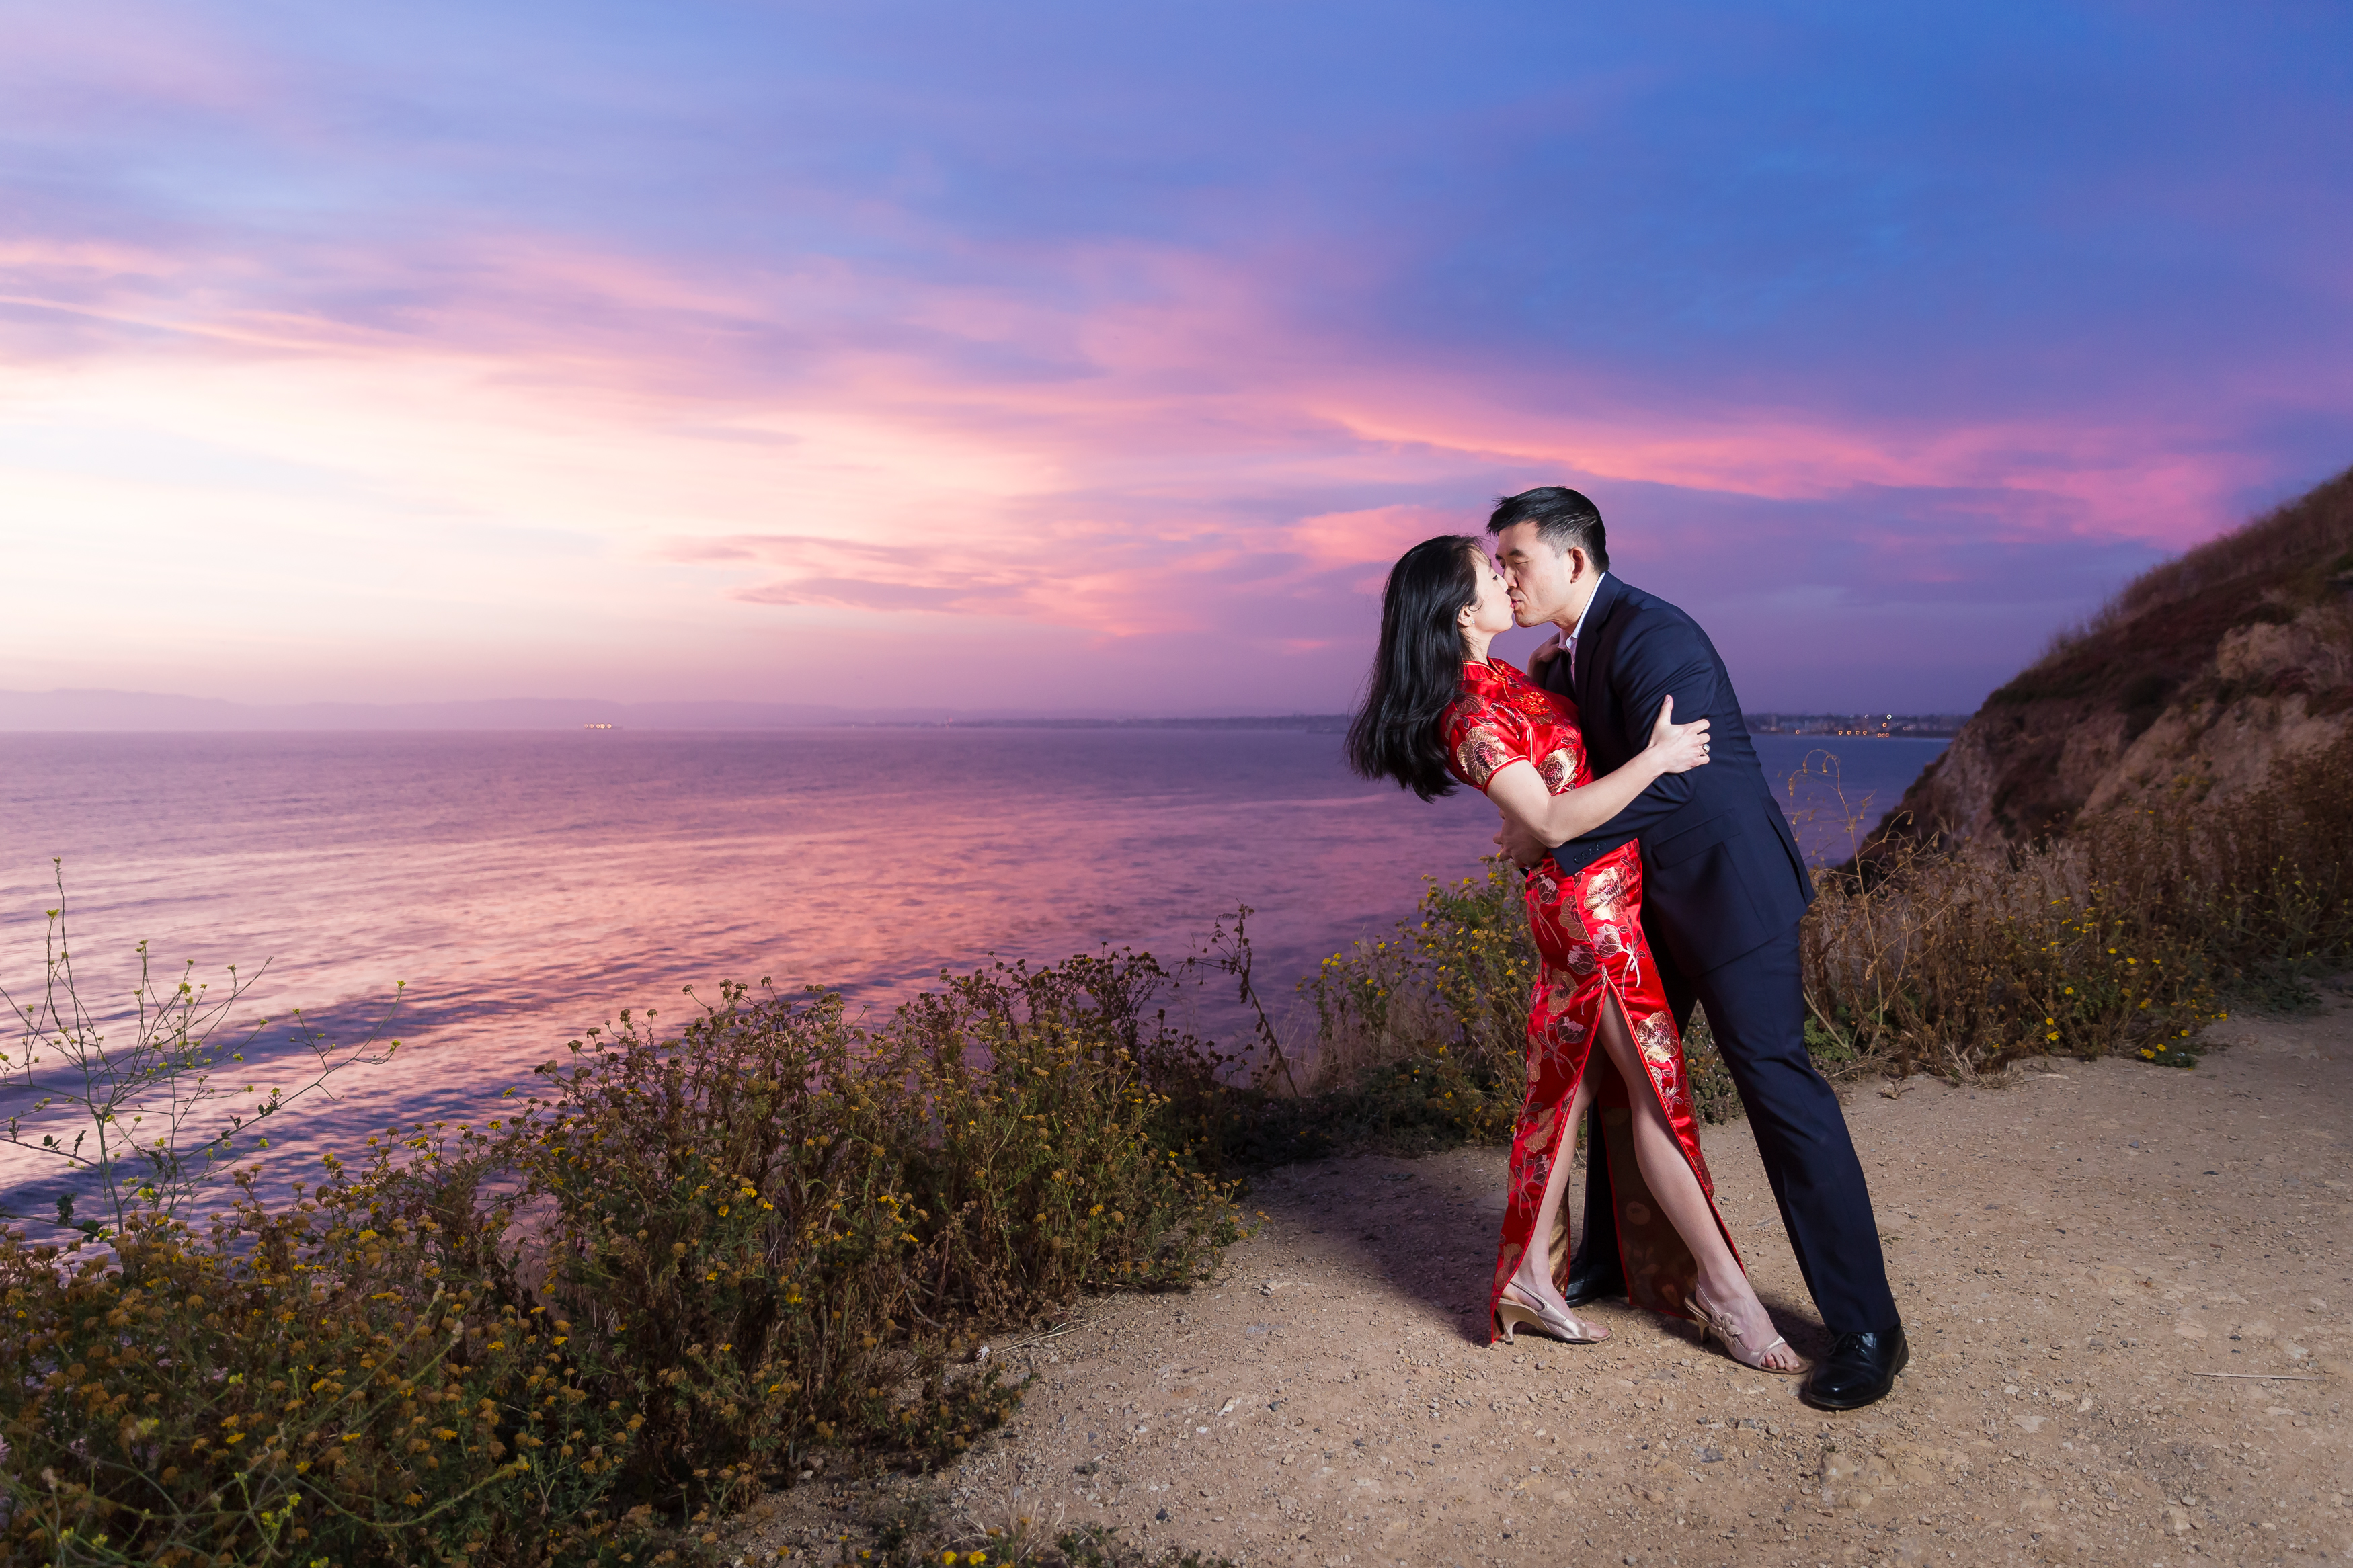 Man dipping woman back into a kiss on cliffside during sunset in Palos Verdes